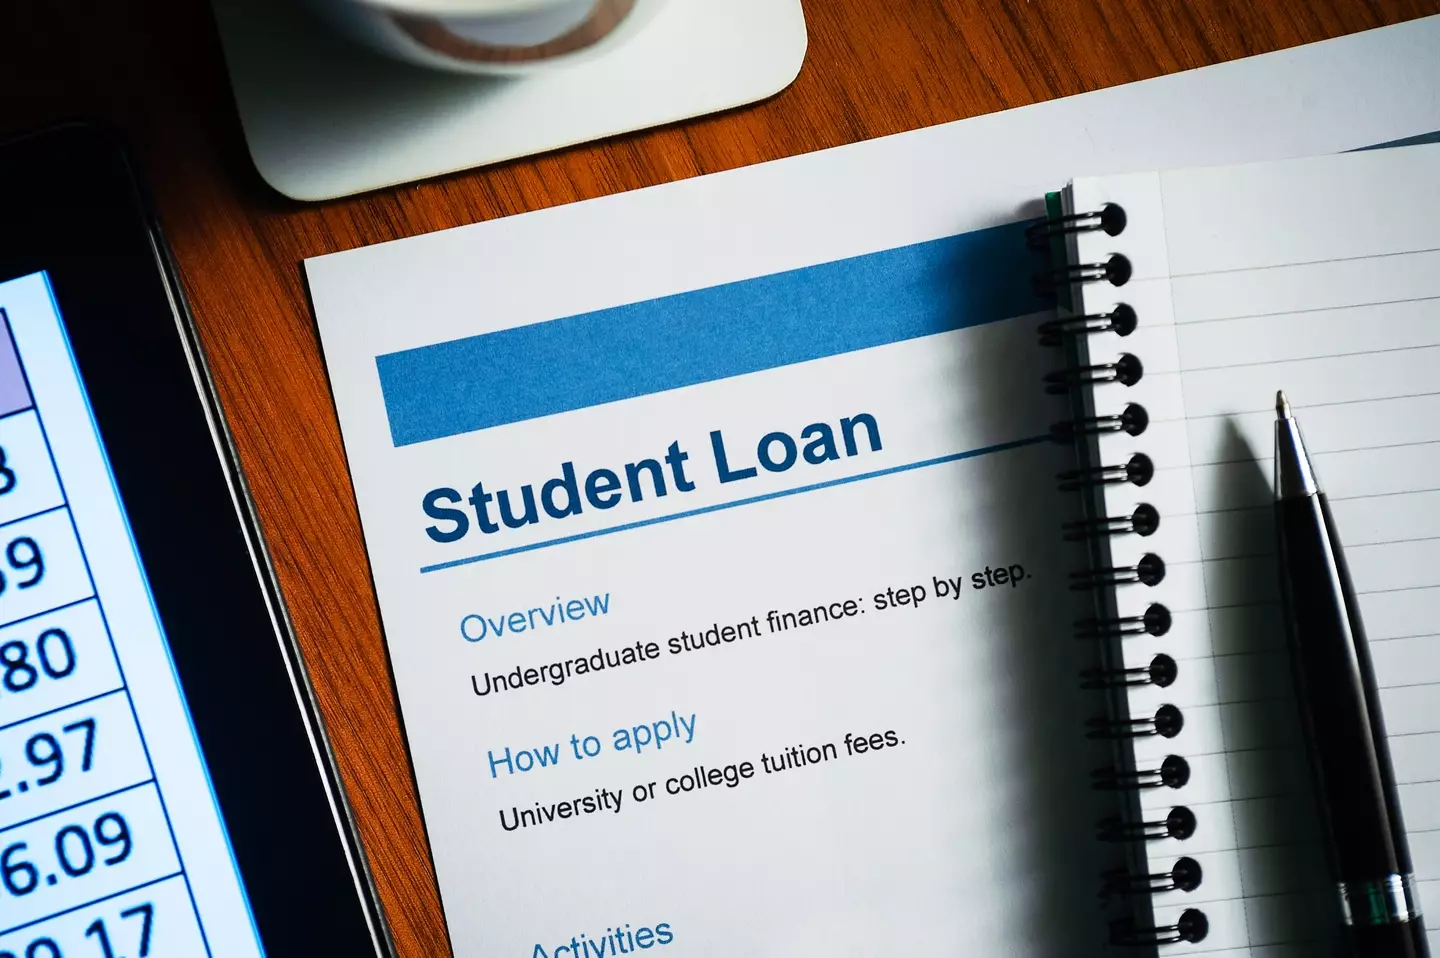 Student loans are a big financial commitment.